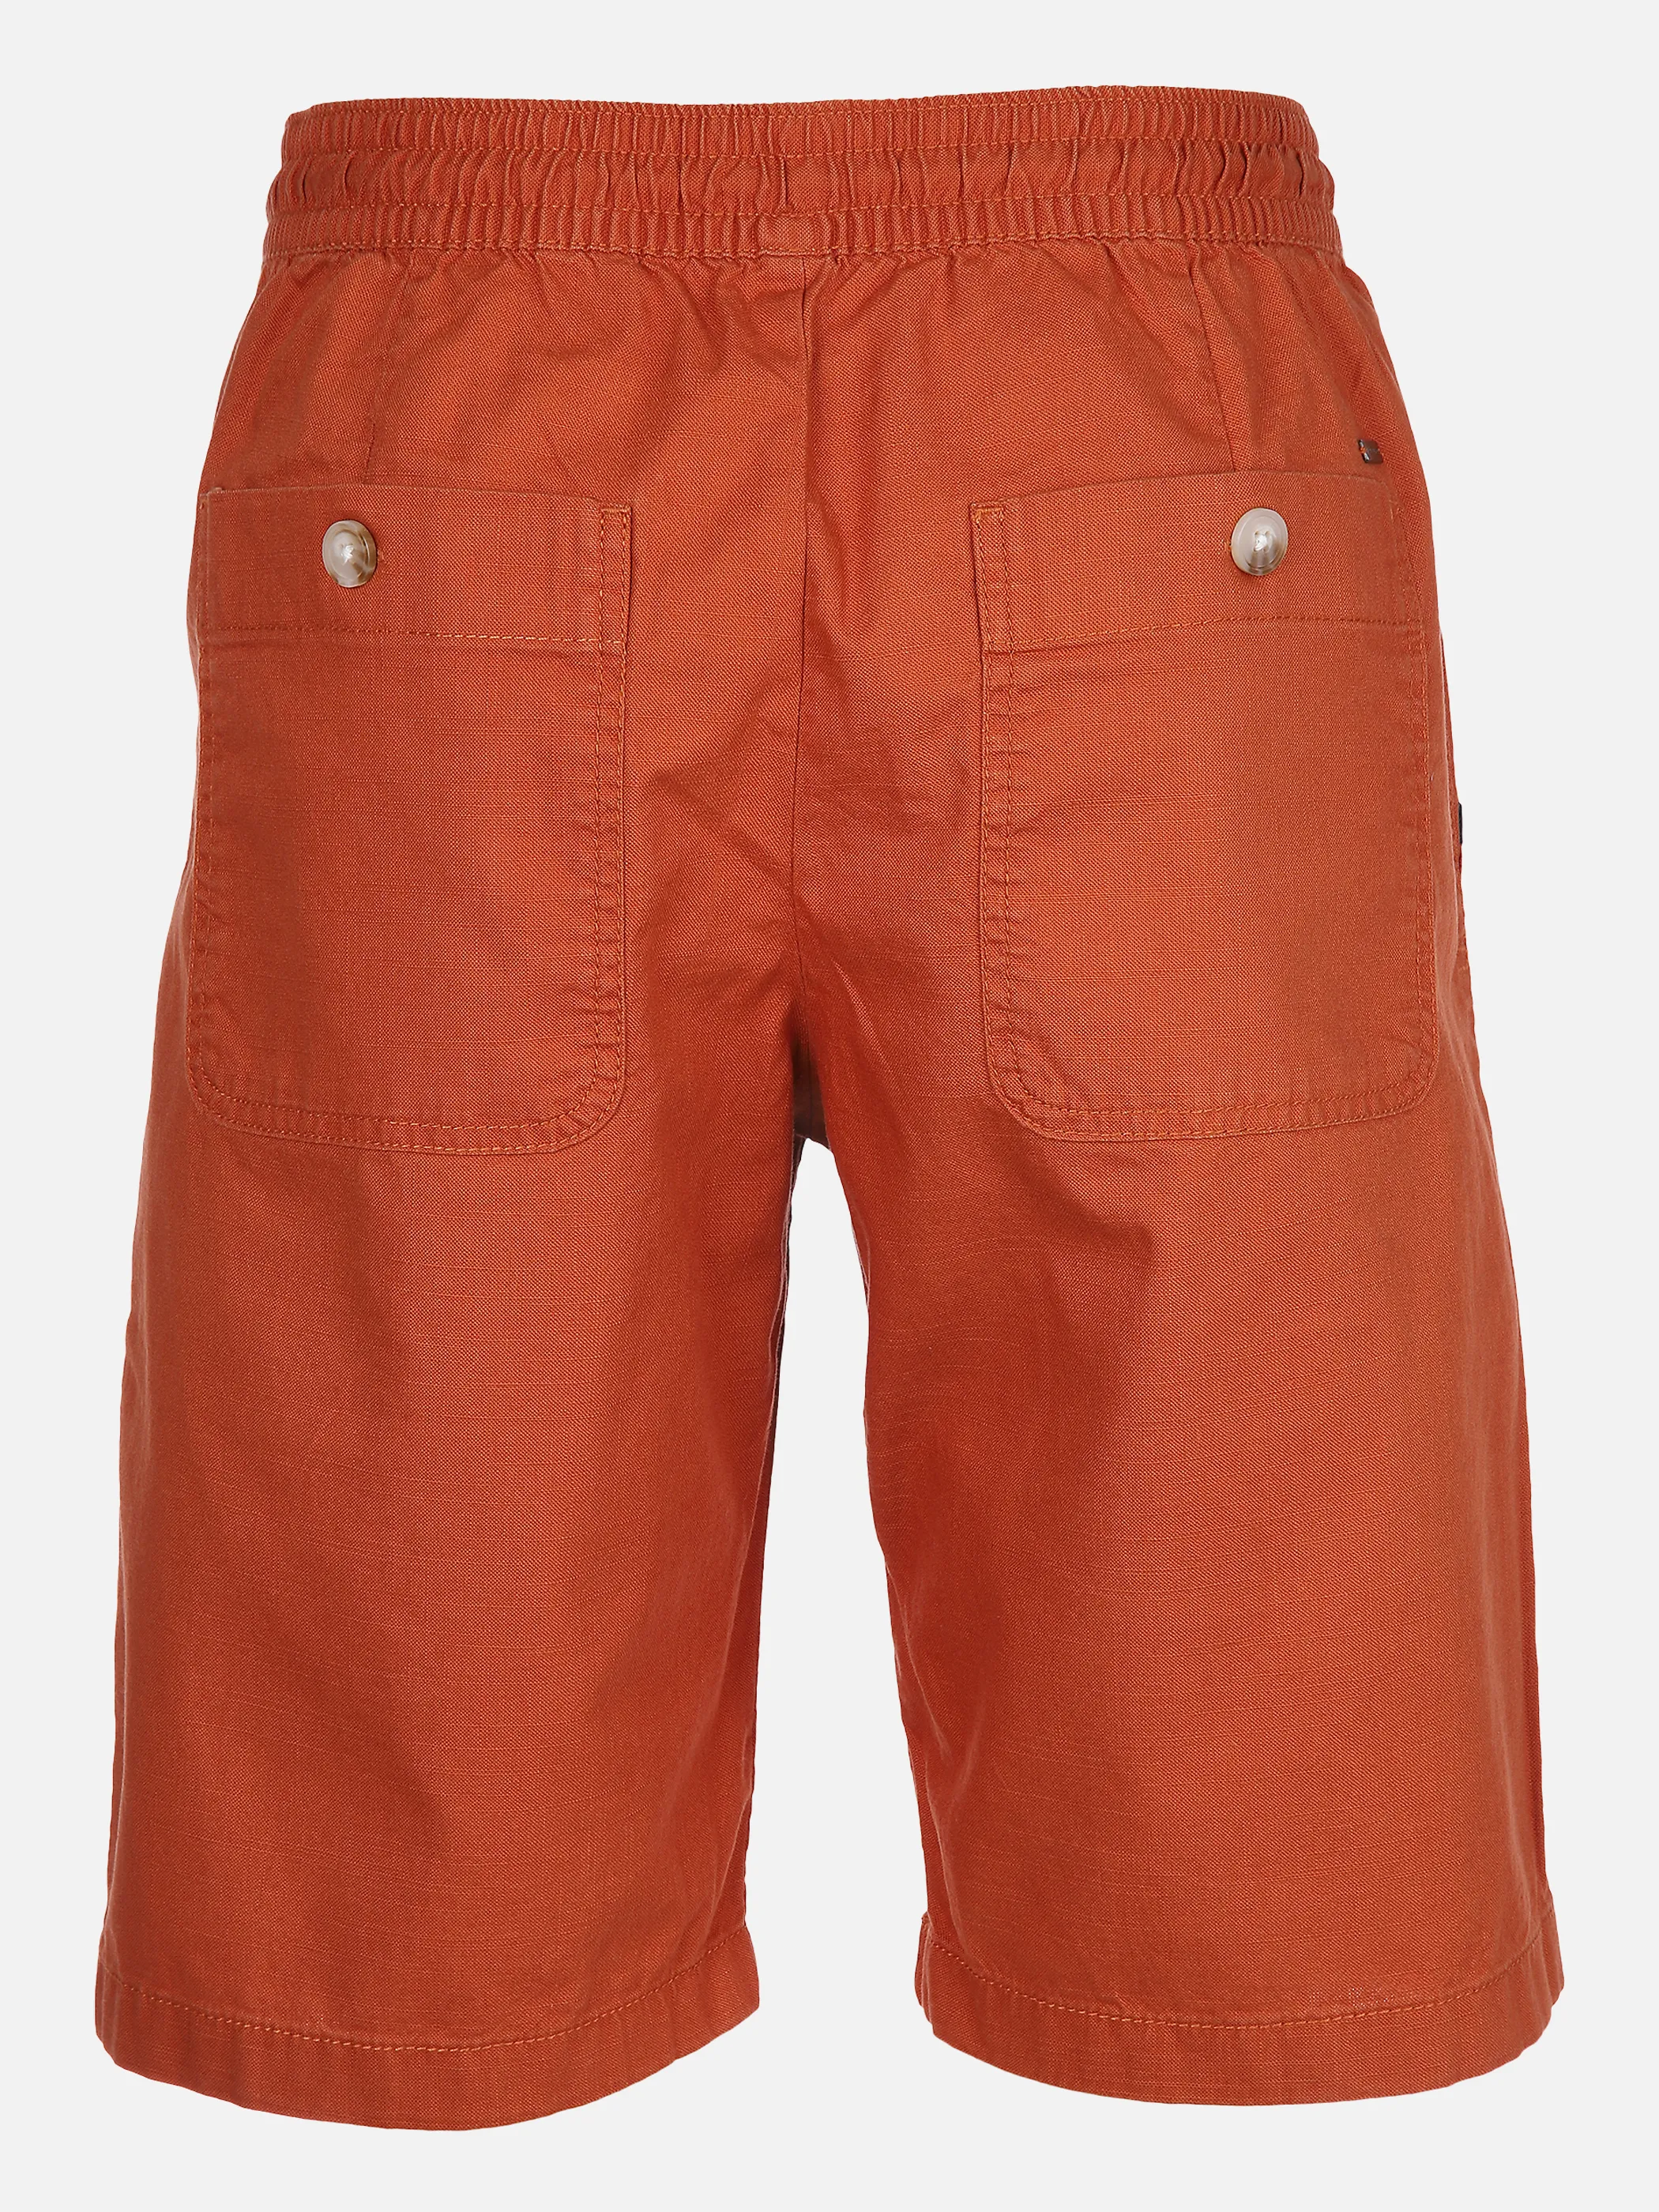 Tom Tailor 1031441 relaxed jogger shorts Braun 865770 15095 2